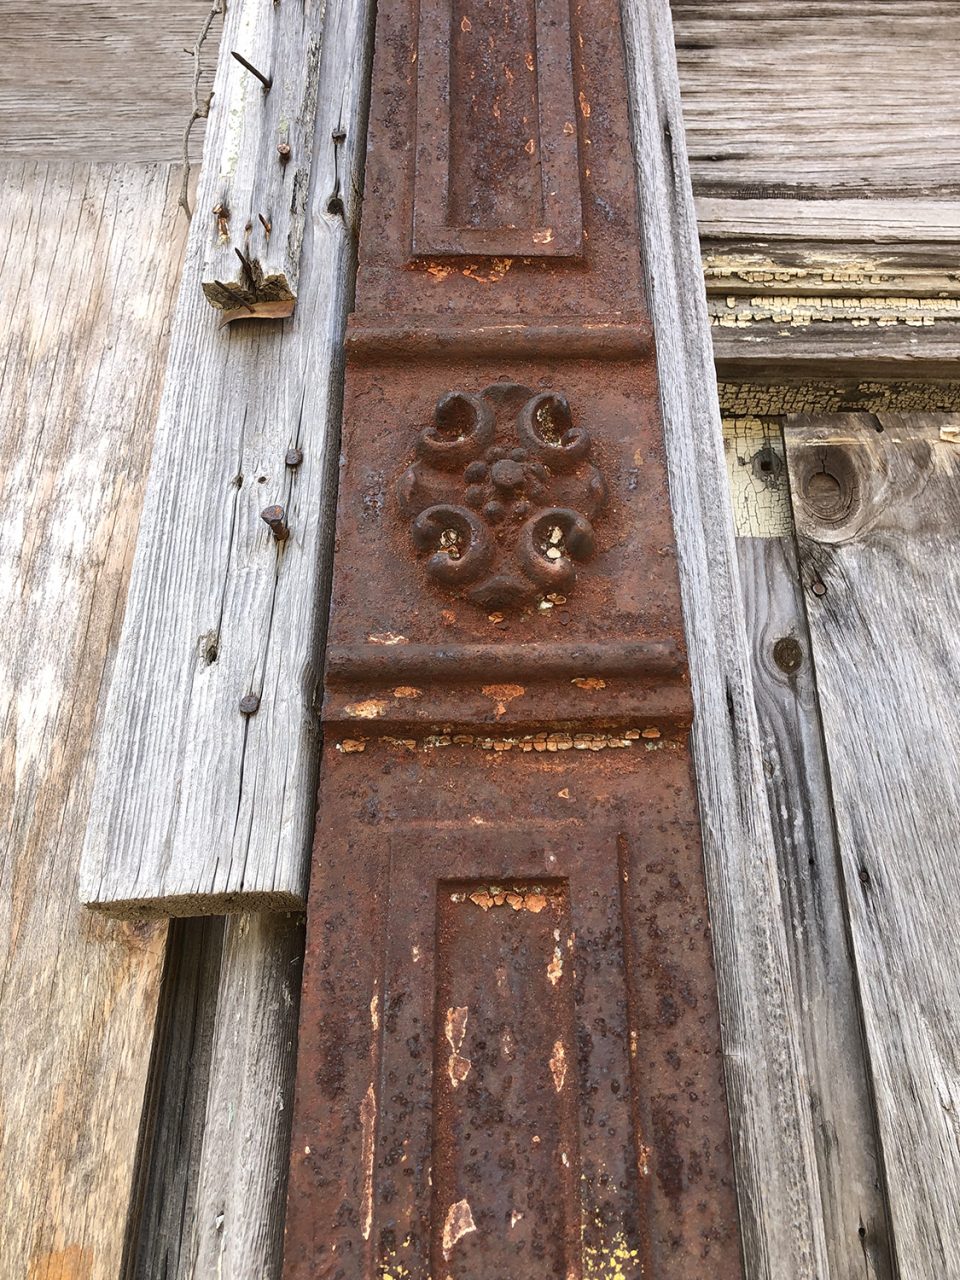 Top of the rusty iron column manufactured by Chickasaw Iron Works Memphis, Tennessee. Seen in Clarksdale, Mississippi.